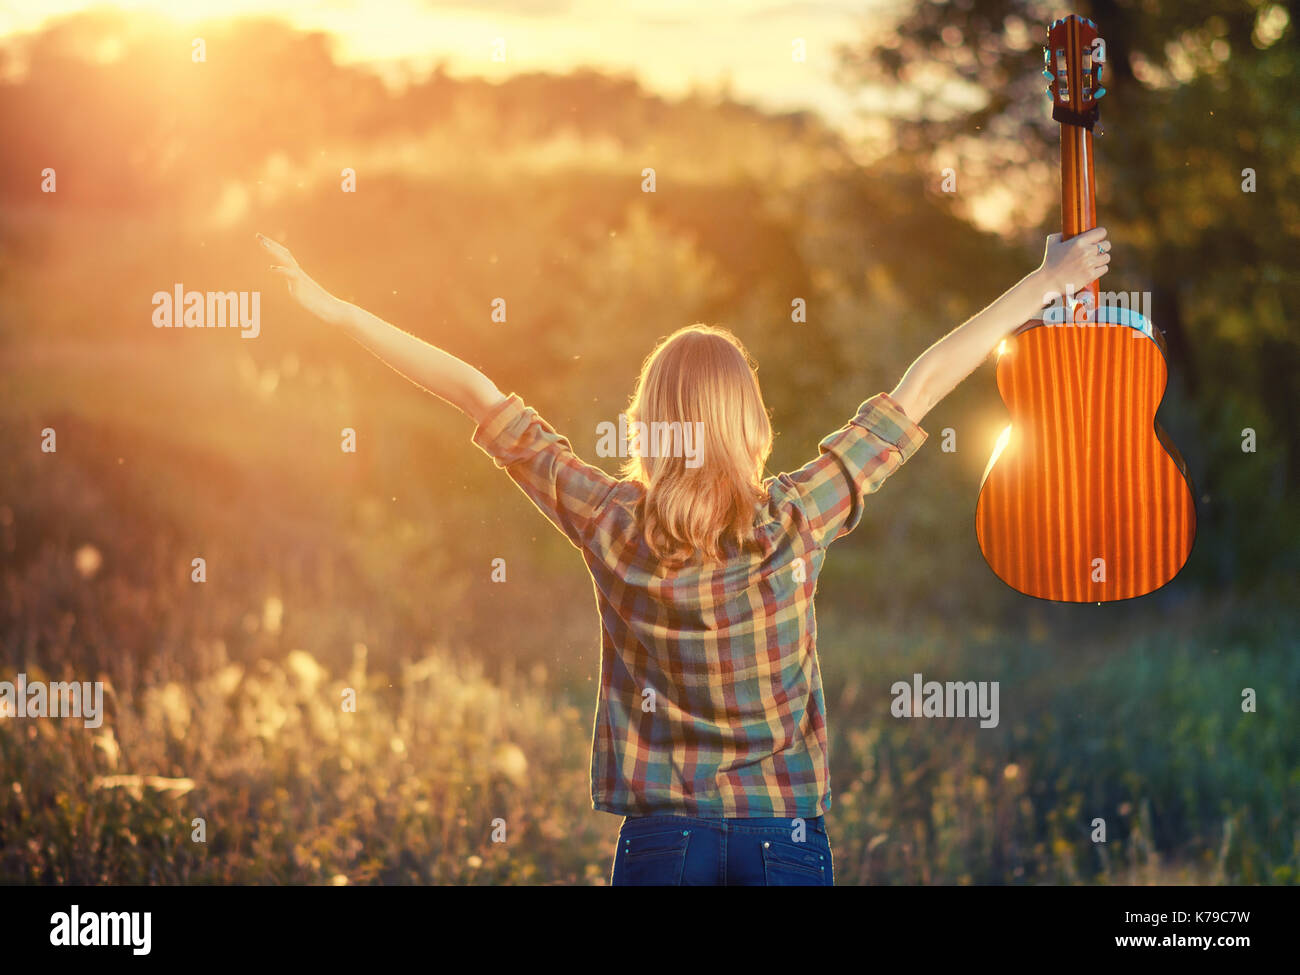 young girl in a plaid shirt at sunset with an acoustic guitar. A woman rejoicing in the autumn weather raised her hands up. Backlight Stock Photo